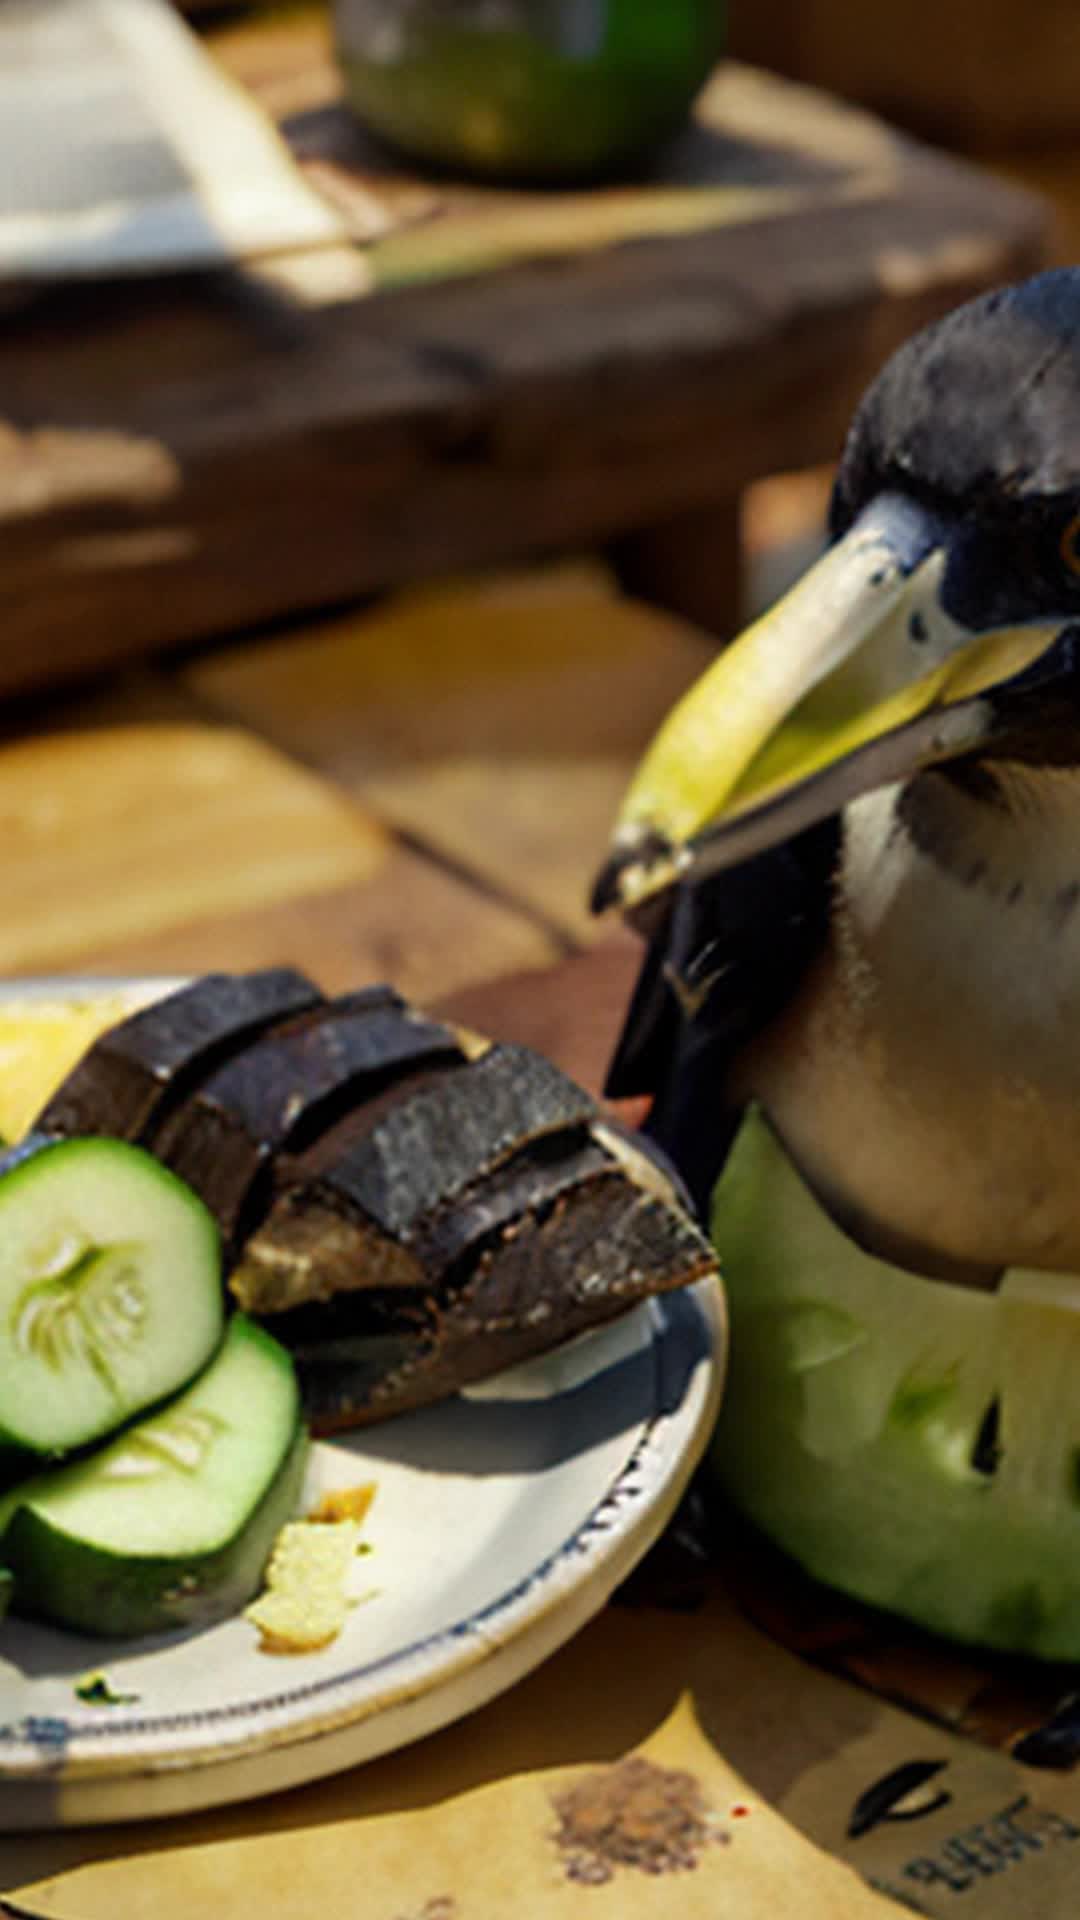 On the stump are an ordinary paper cup, a bottle of vodka, a herring on a newspaper, and a pickled cucumber In the background, a large black crow holds a piece of hard cheese in its beak